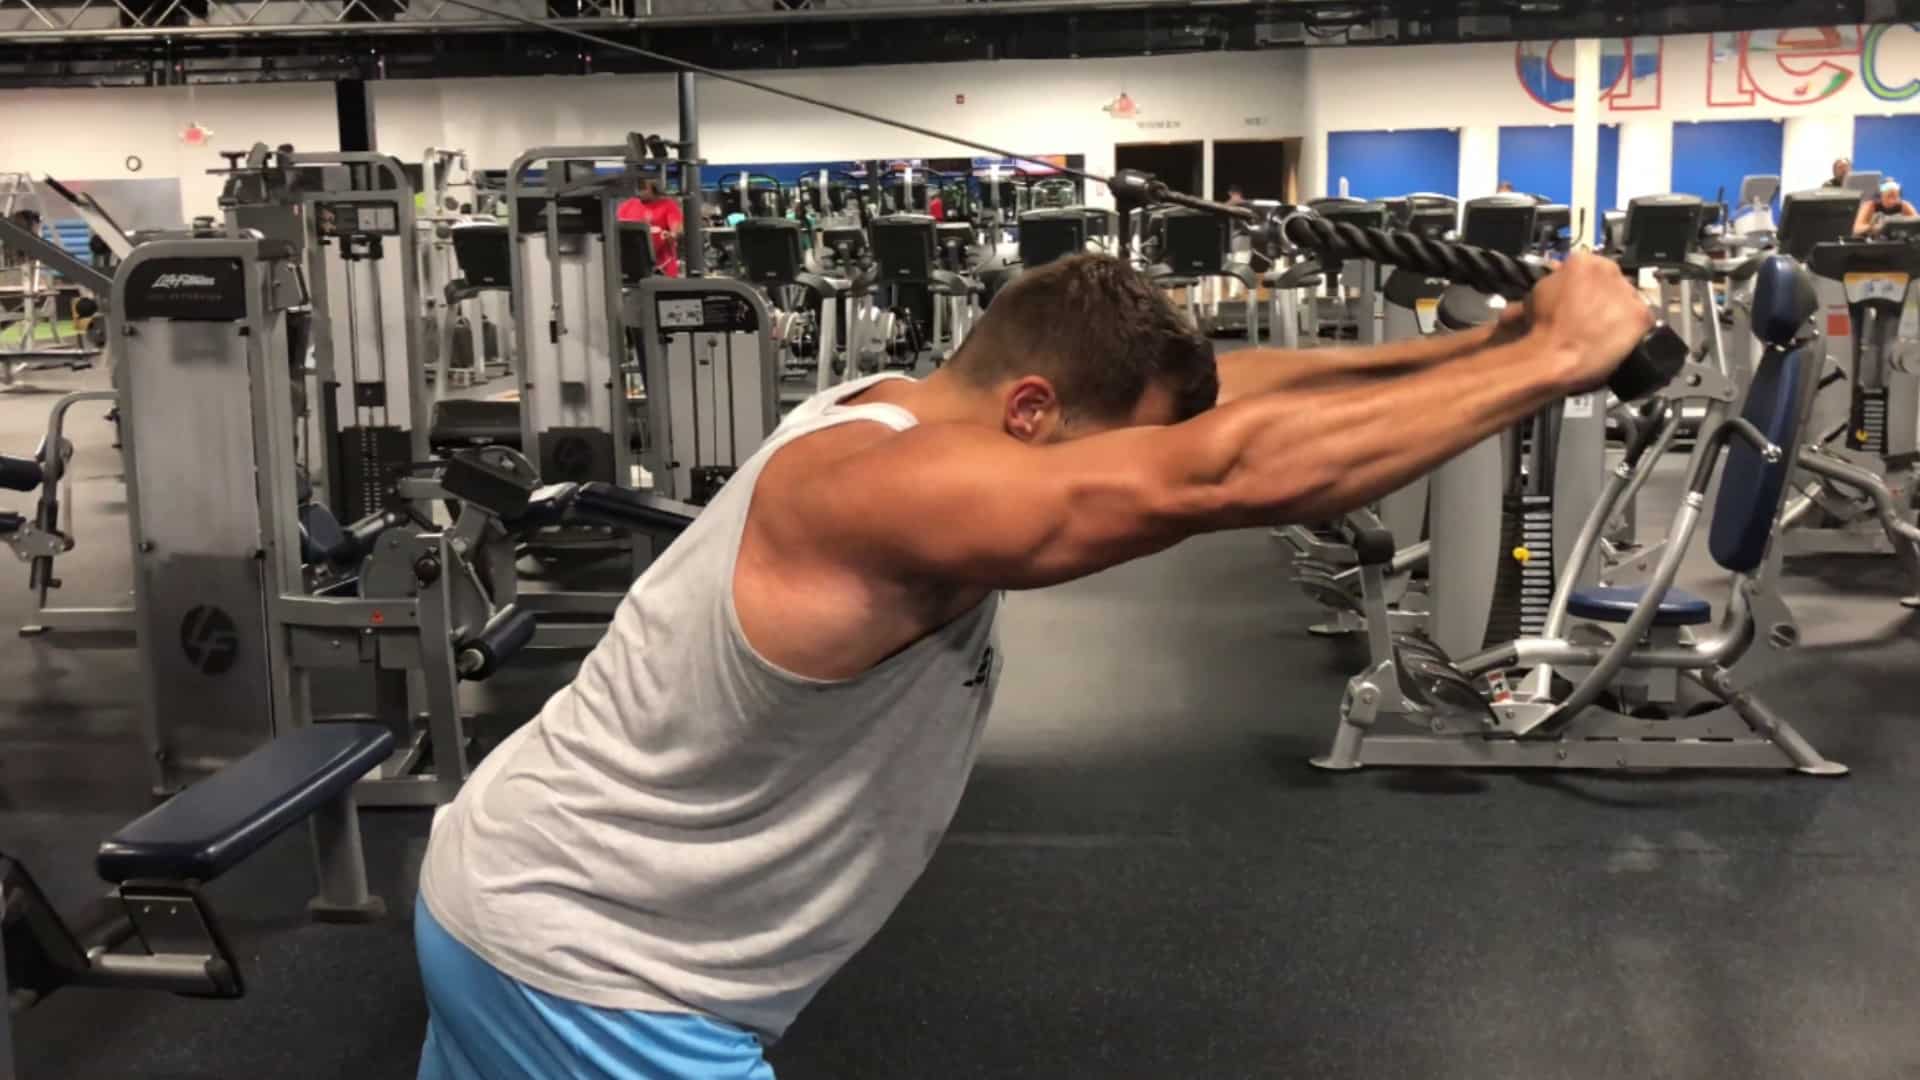 Cable Tricep Extension